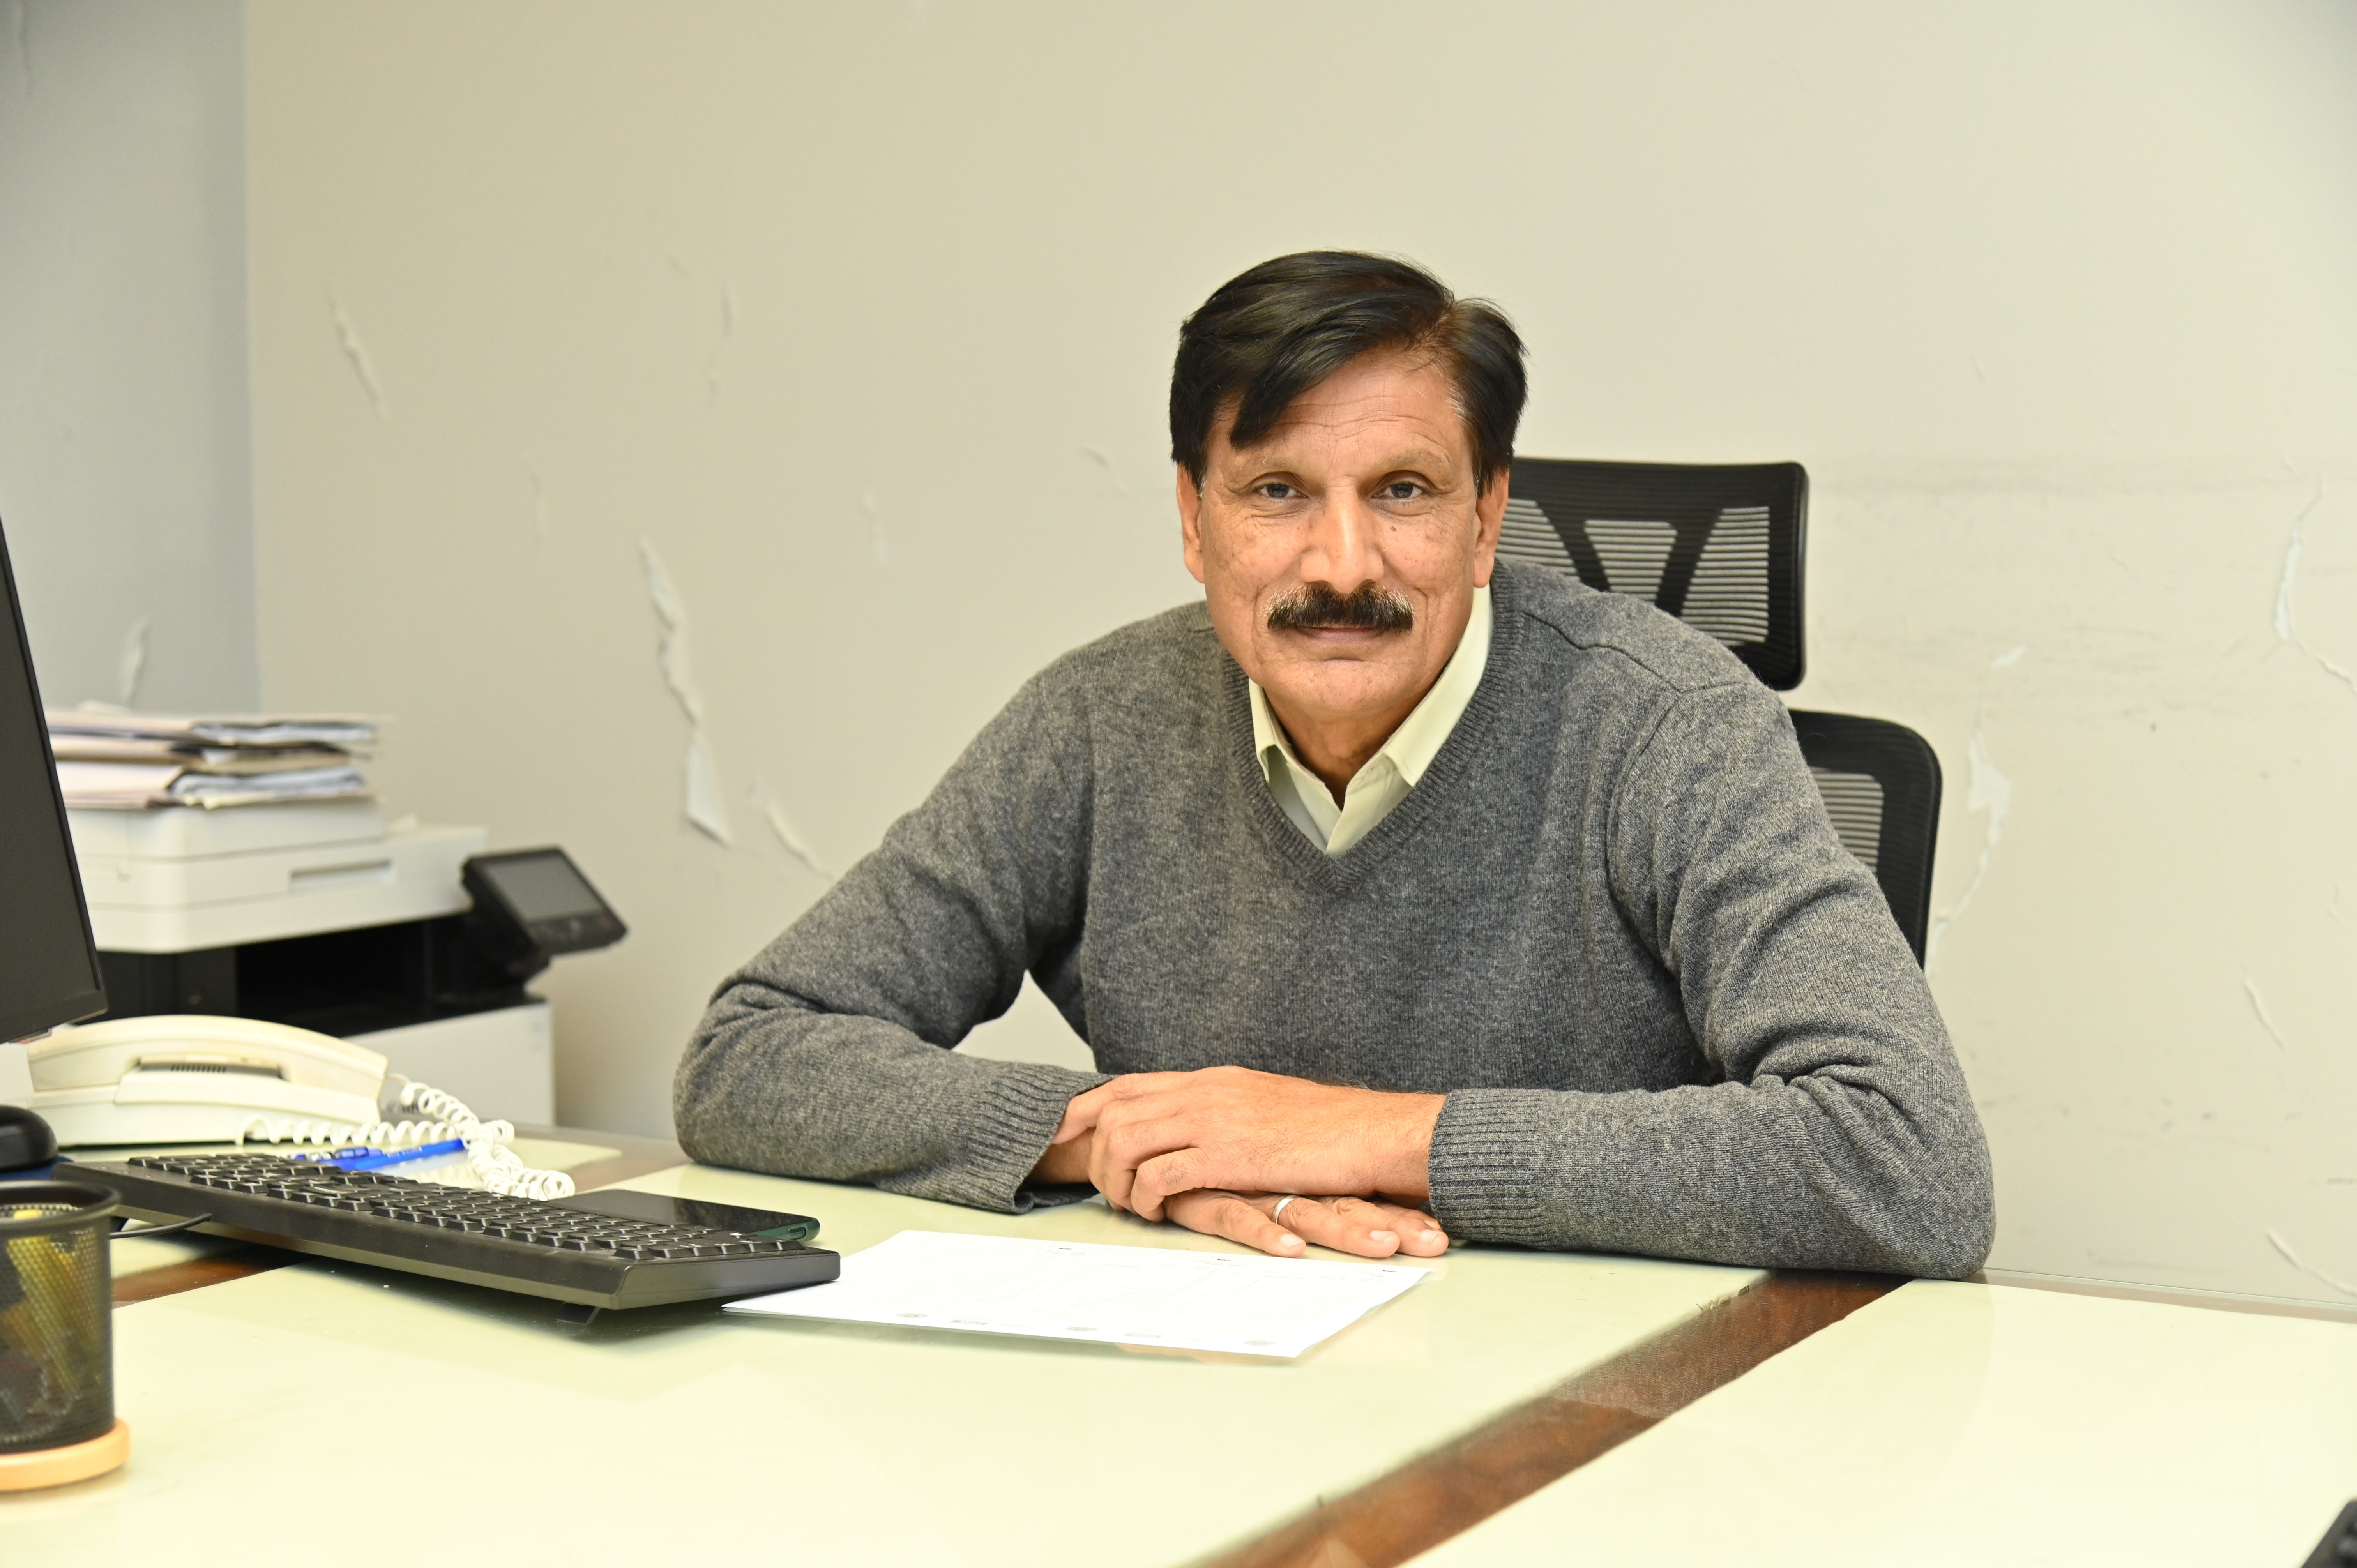 Mukhtar Ali, The manager at the tourist facilitation center